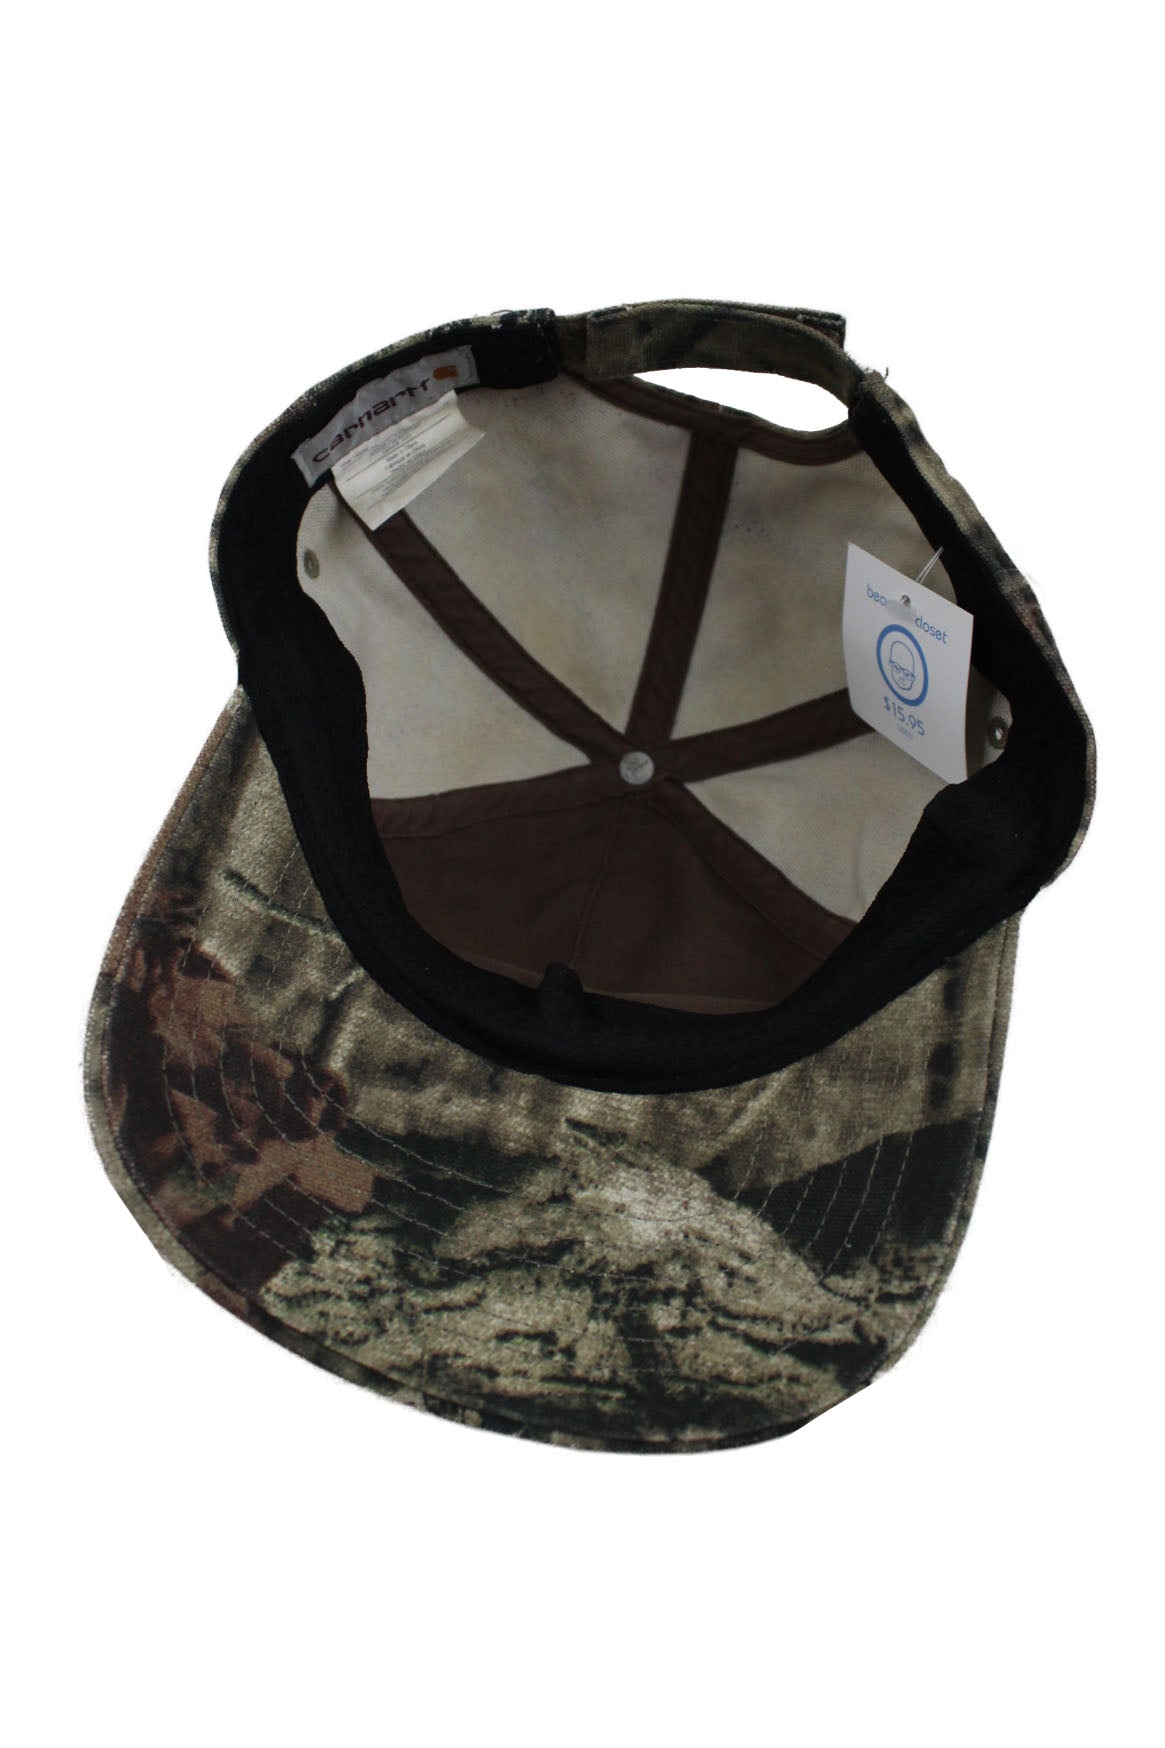 underside view with 'carhartt' logo tag of hat.